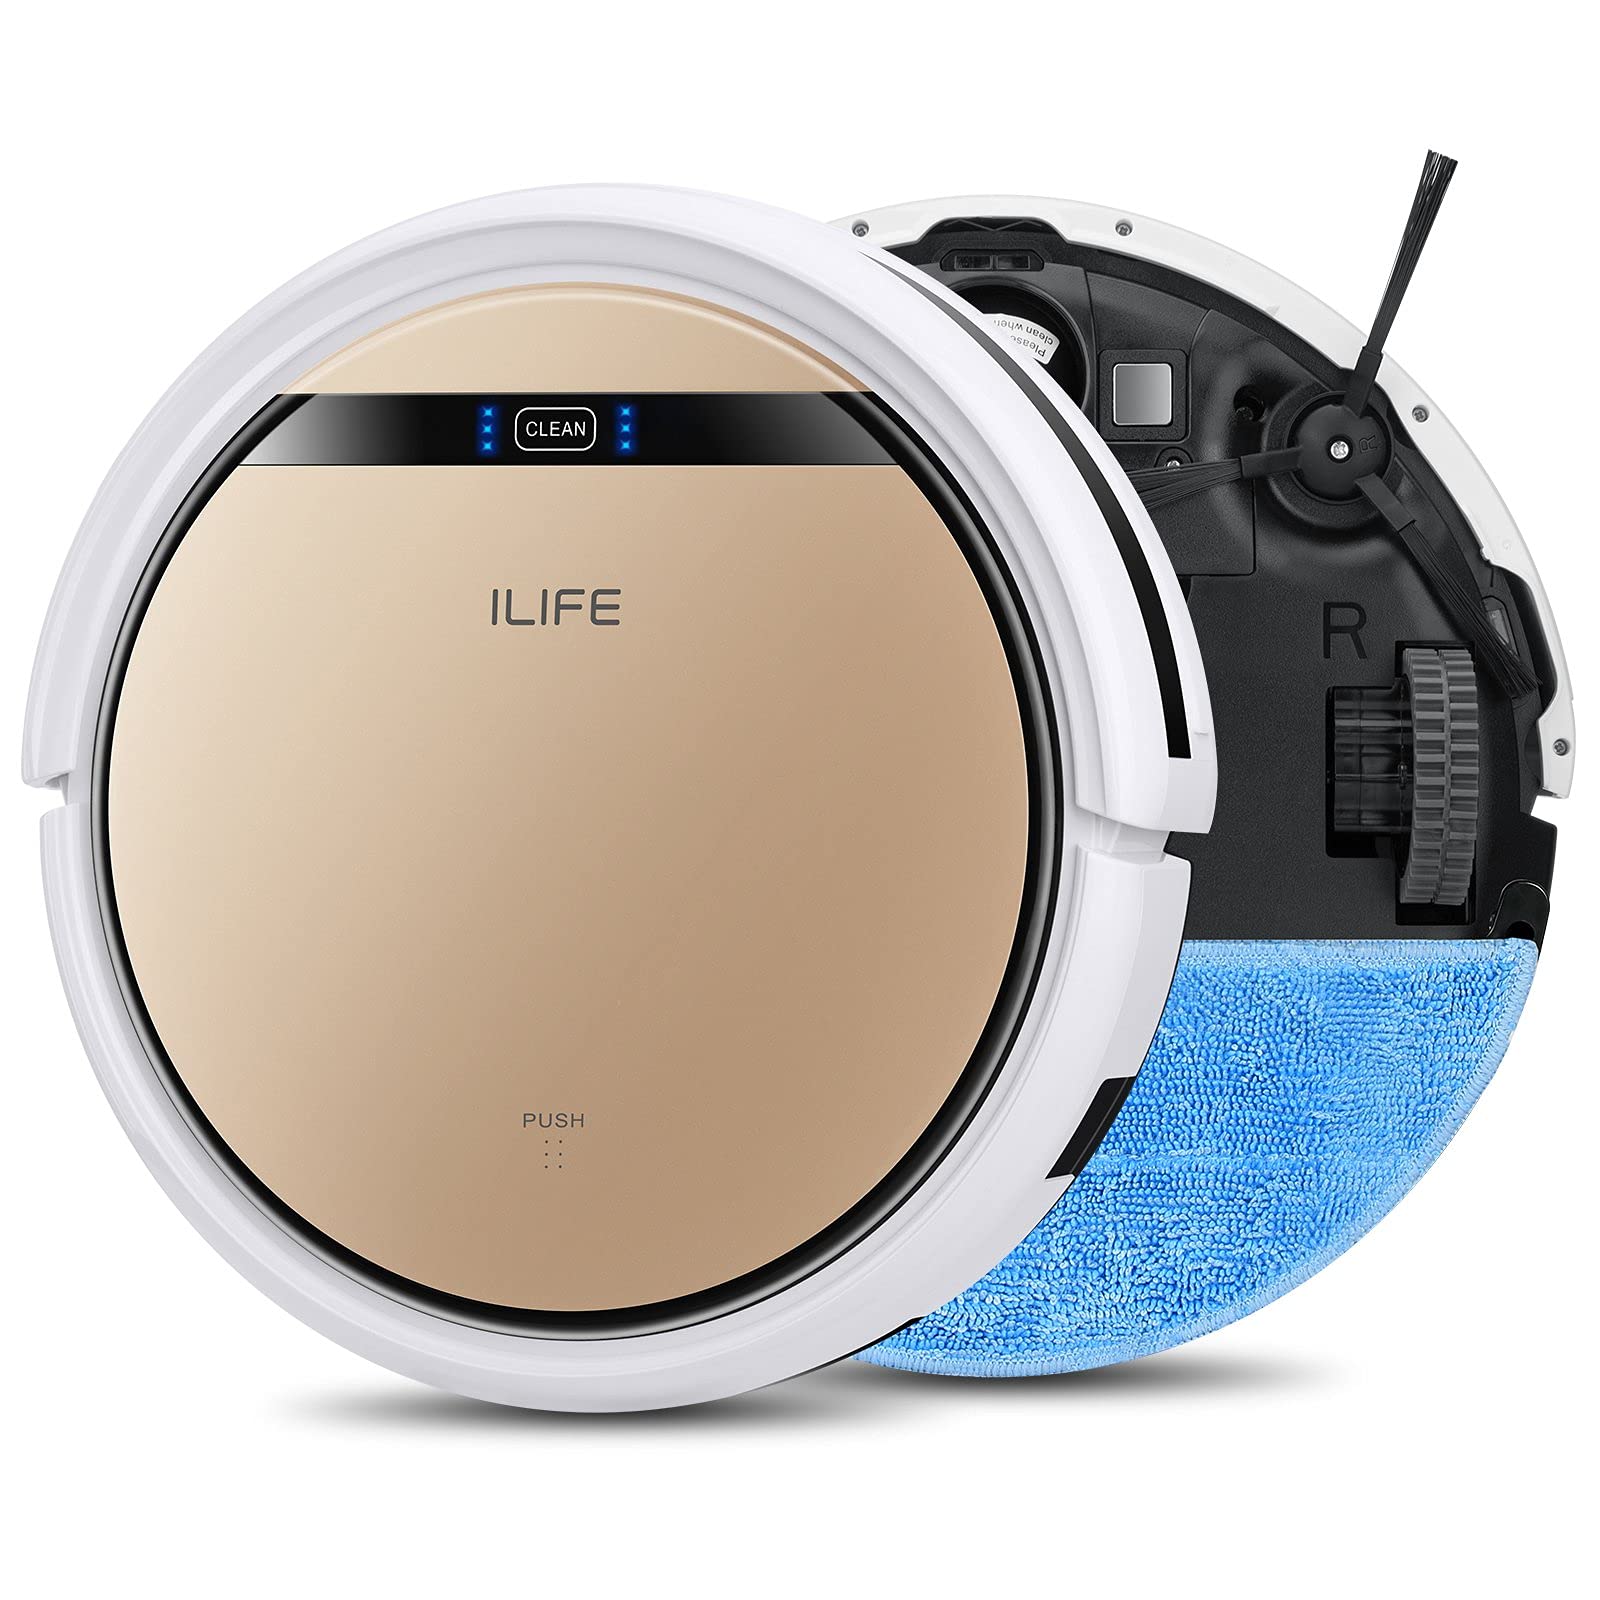 ILIFE V5s Pro Robot Vacuum Mop Cleaner with Water Tank, Automatically Sweeping Scrubbing Mopping Floor Cleaning Robot